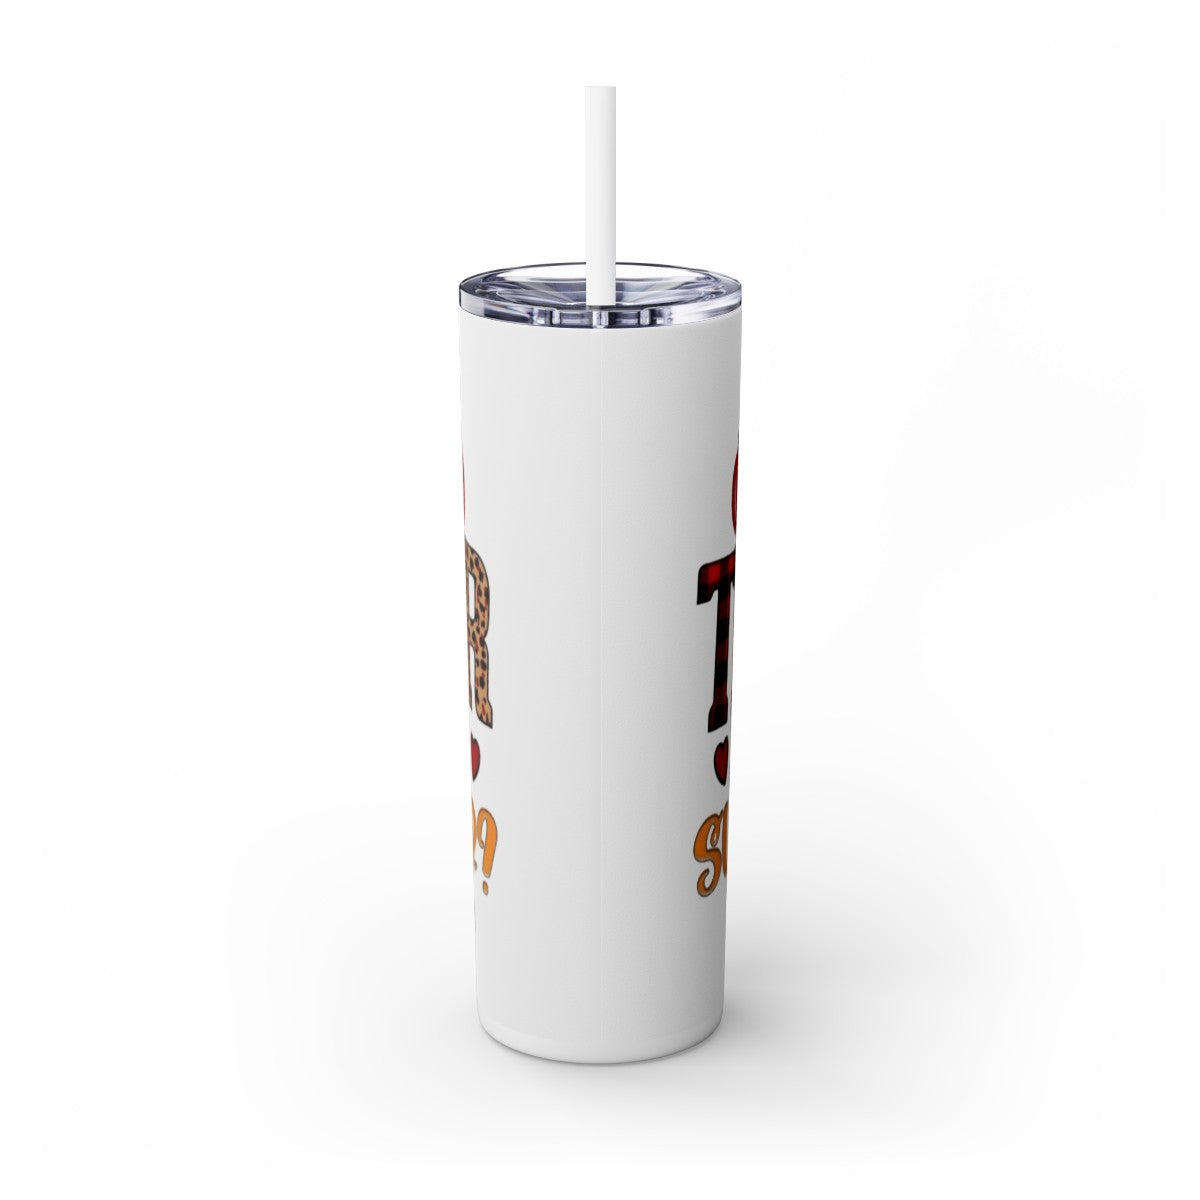 Get trendy with I'm a Teacher, What's Your Super[ower? Skinny Tumbler with Straw, 20oz -  available at Good Gift Company. Grab yours for $44.20 today!